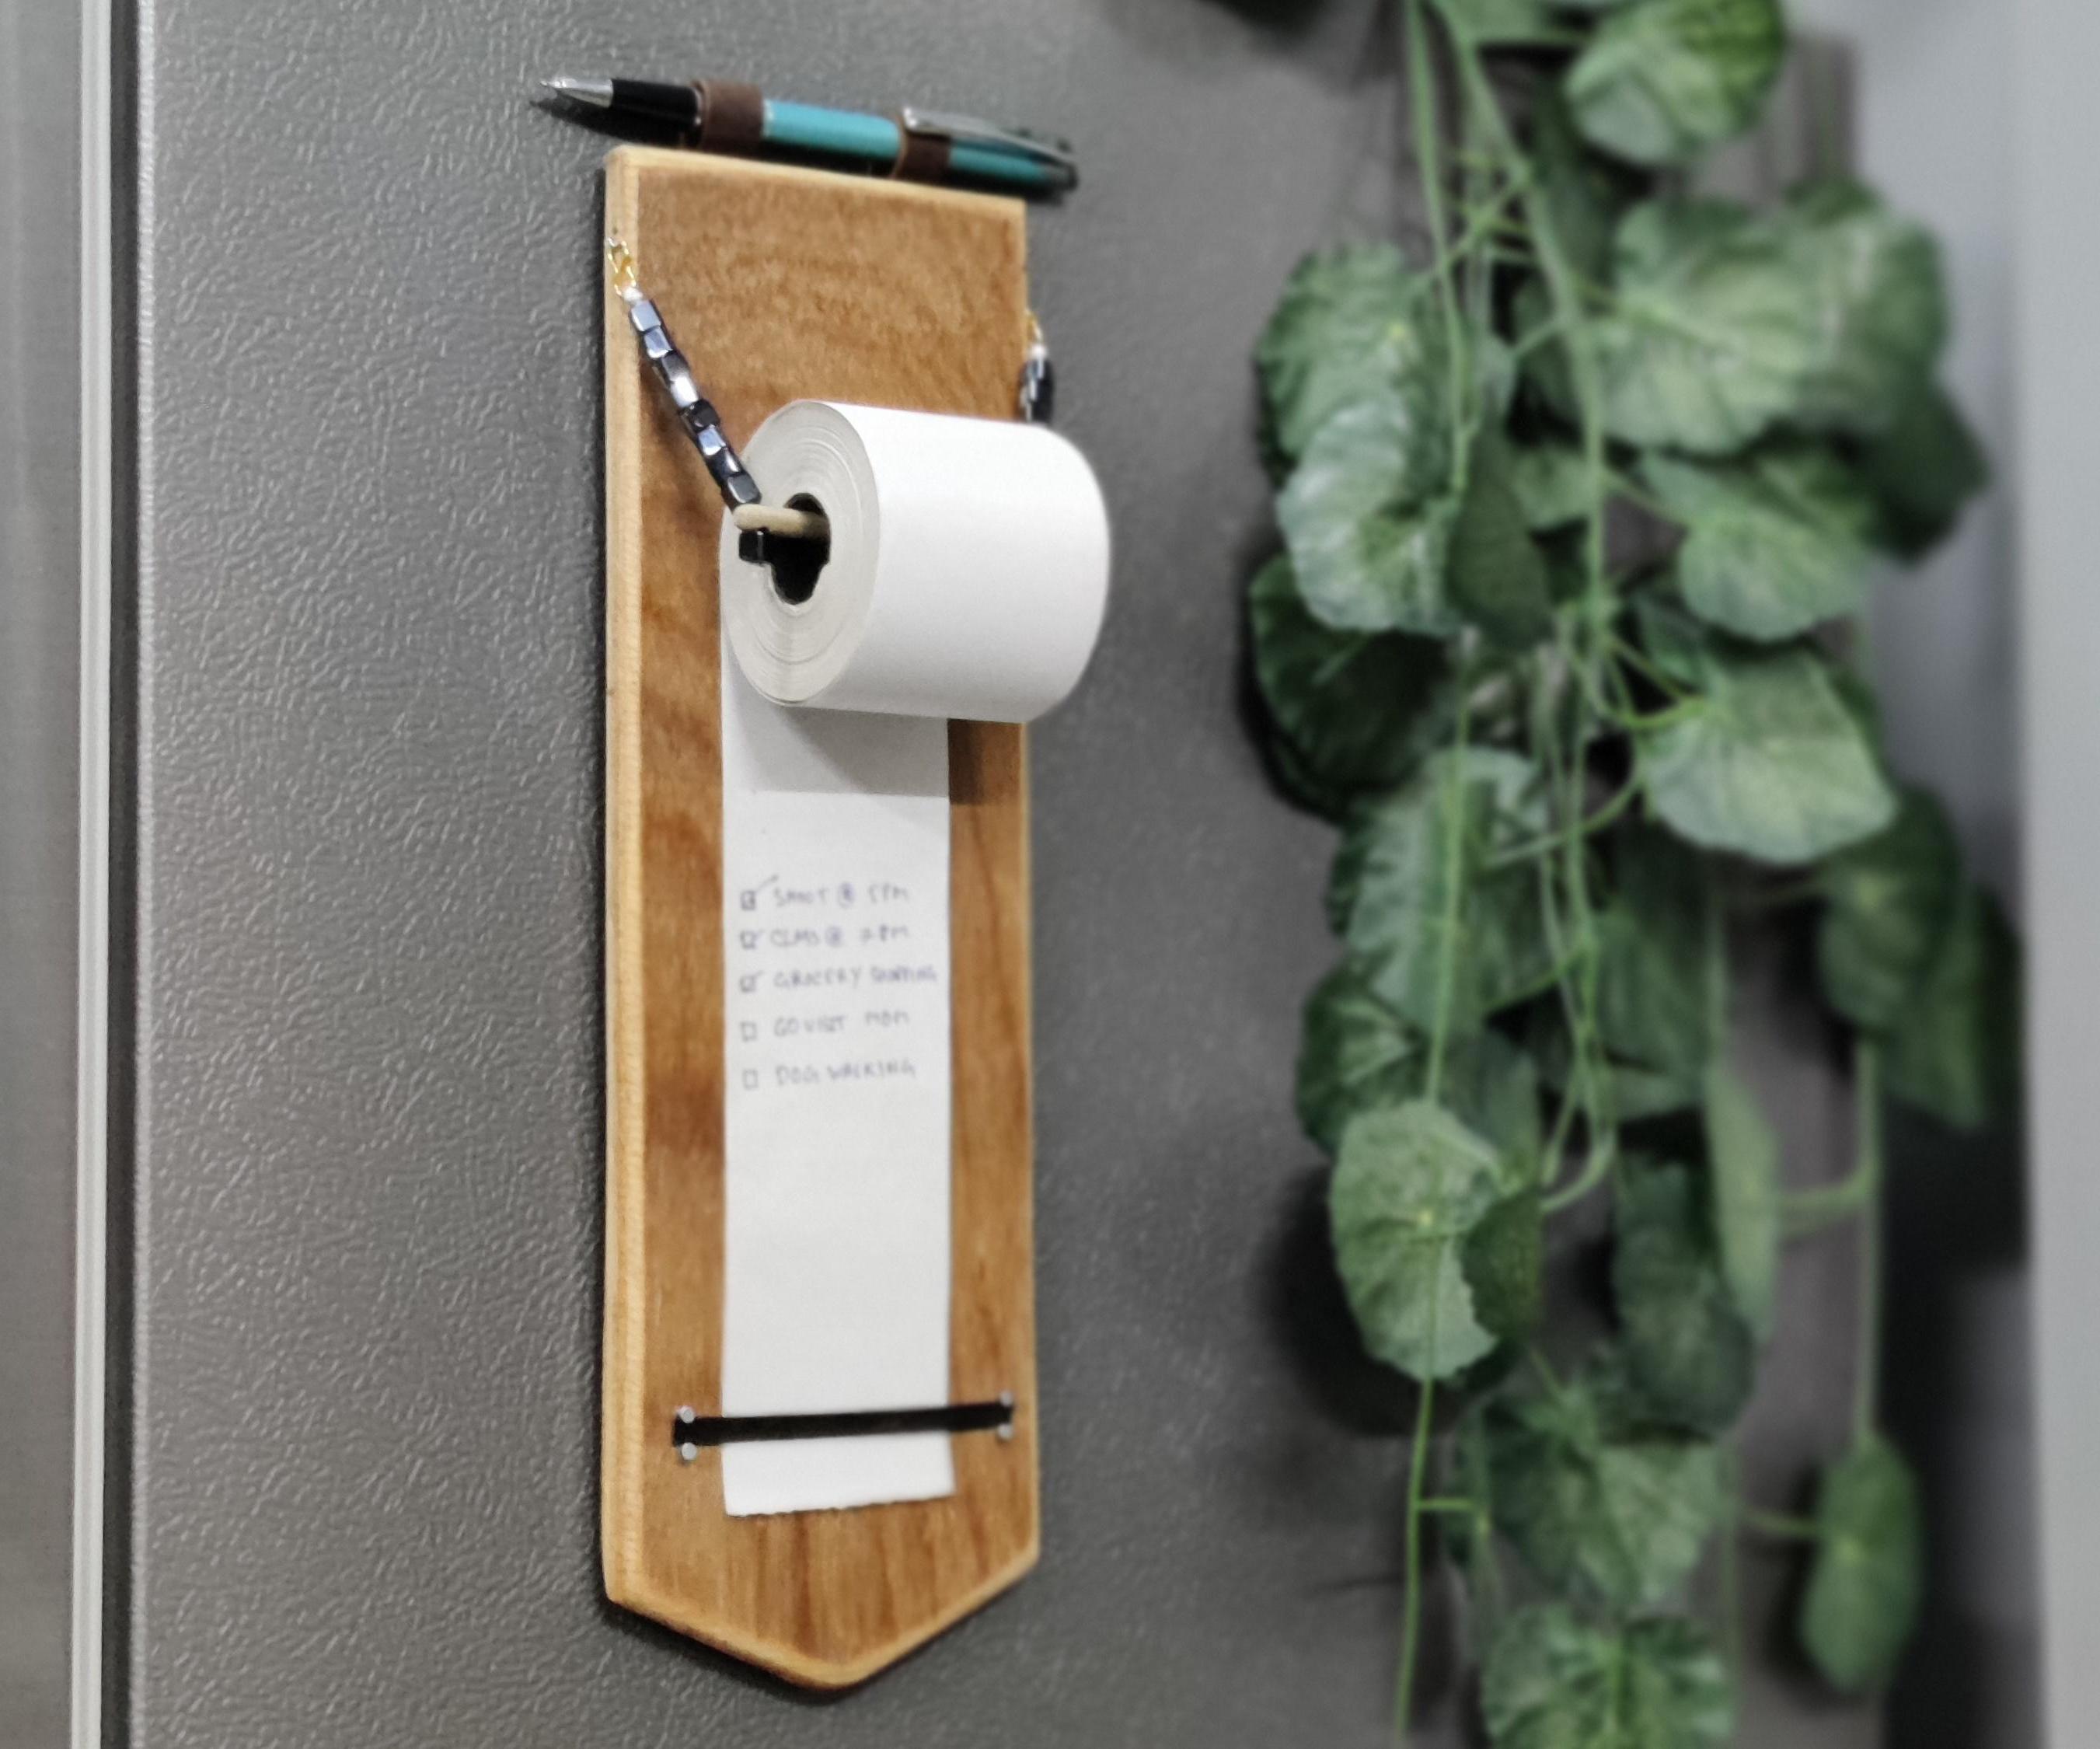 Creative DIY "Shopping and To-do List" Notepad Holder